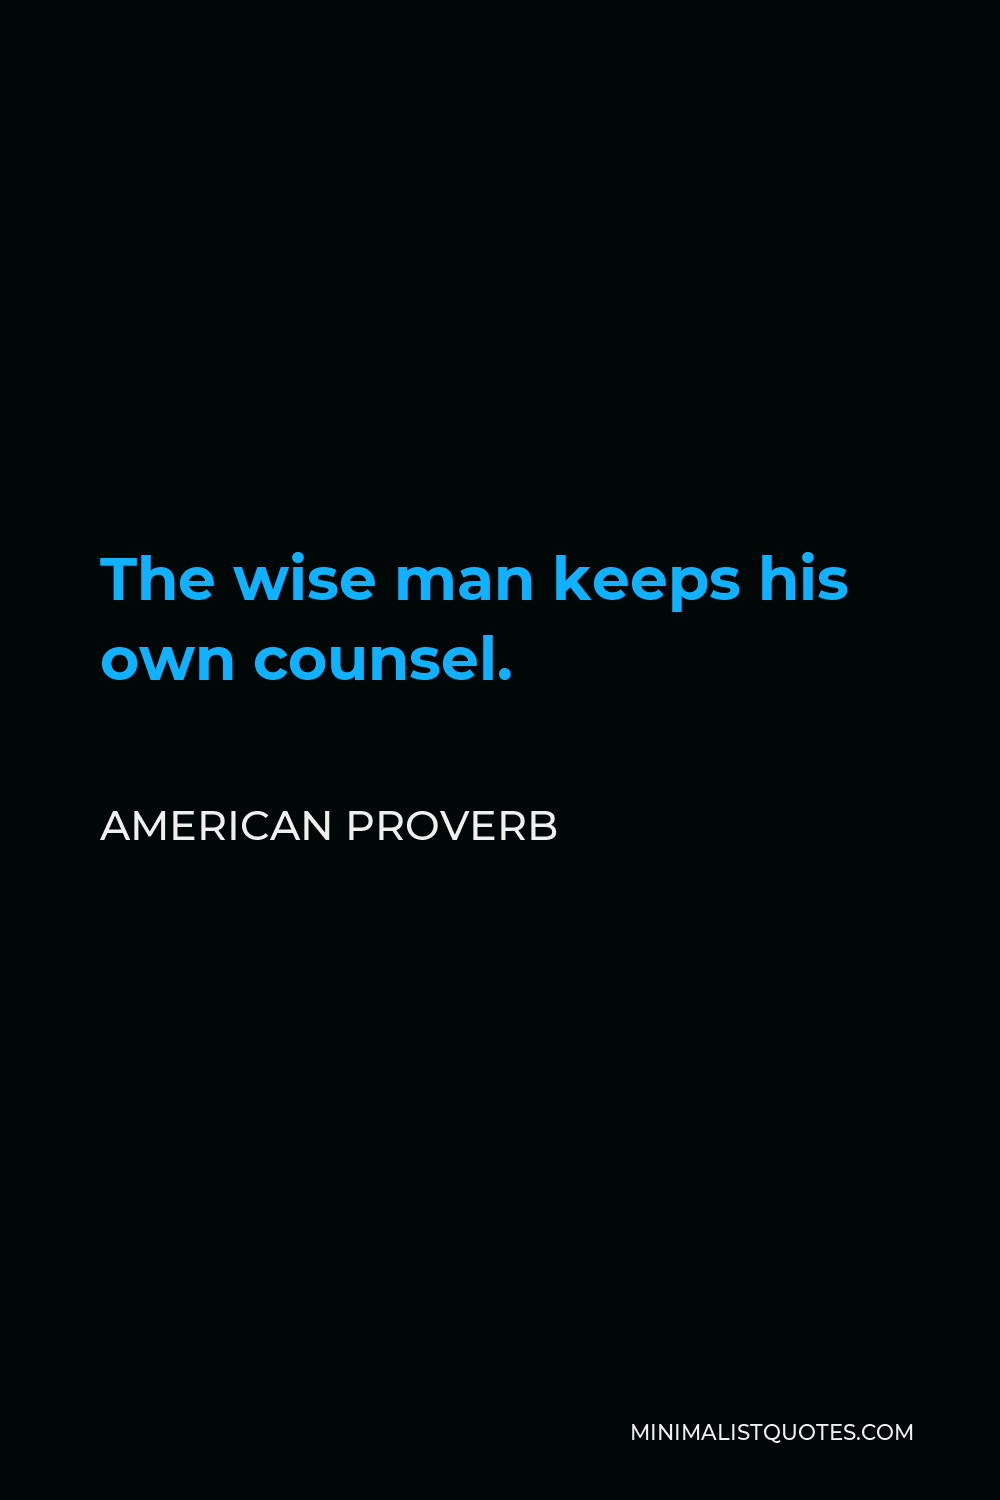 American Proverb Quote - The wise man keeps his own counsel.